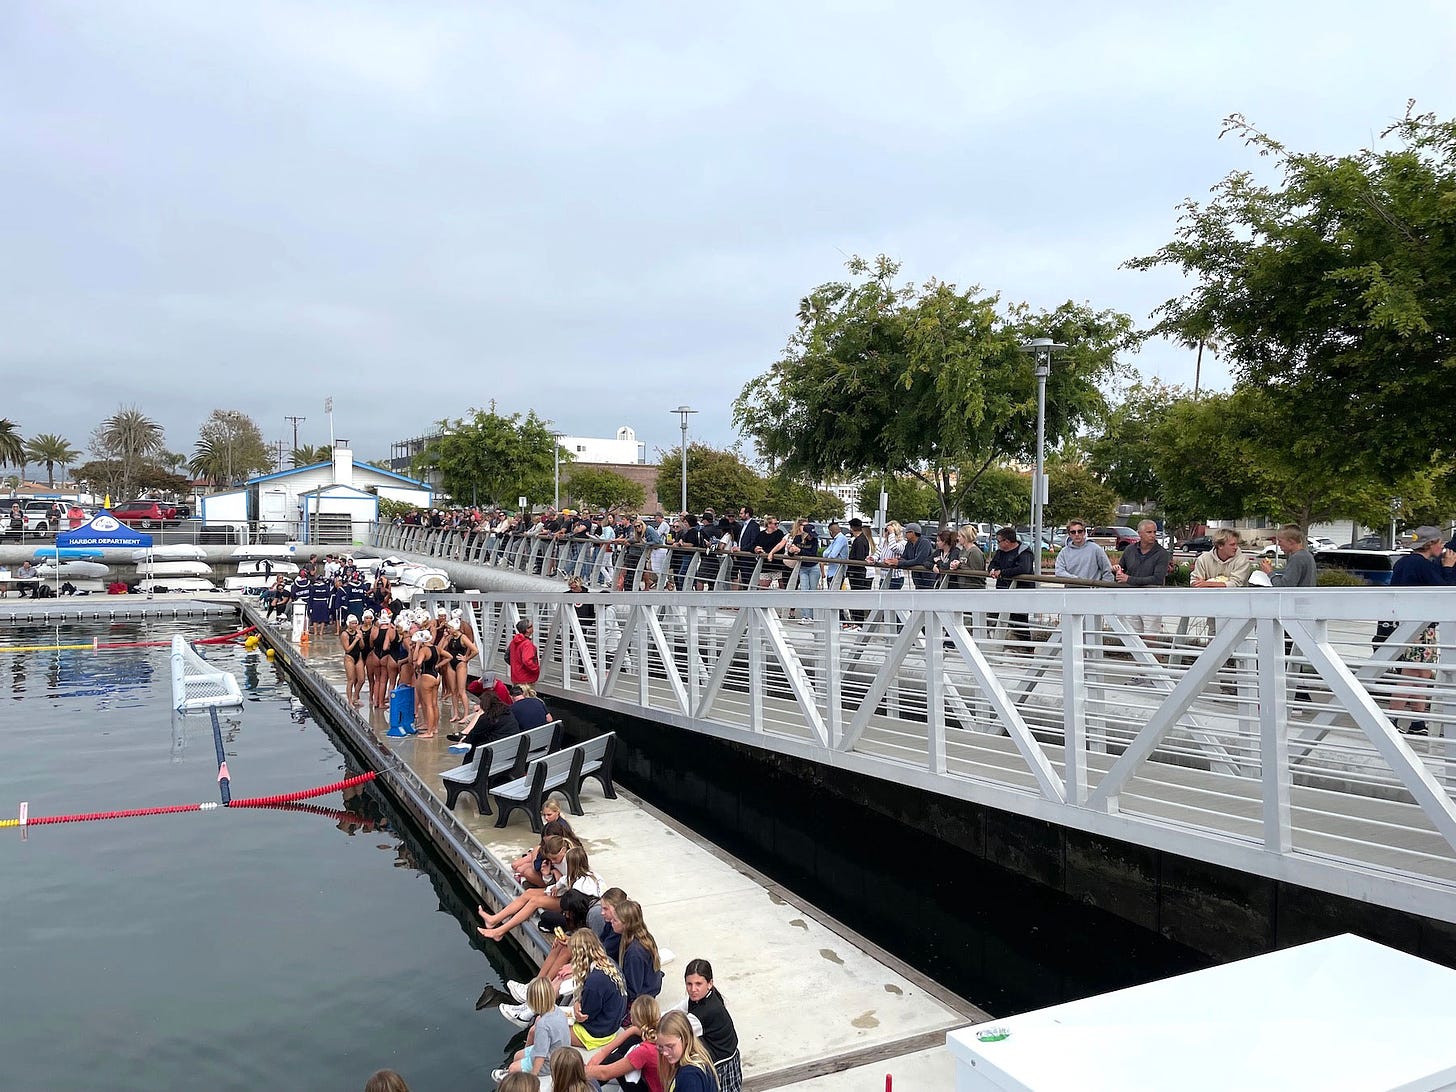 Water polo IN THE Bay crowd lining railing SNN 5.19